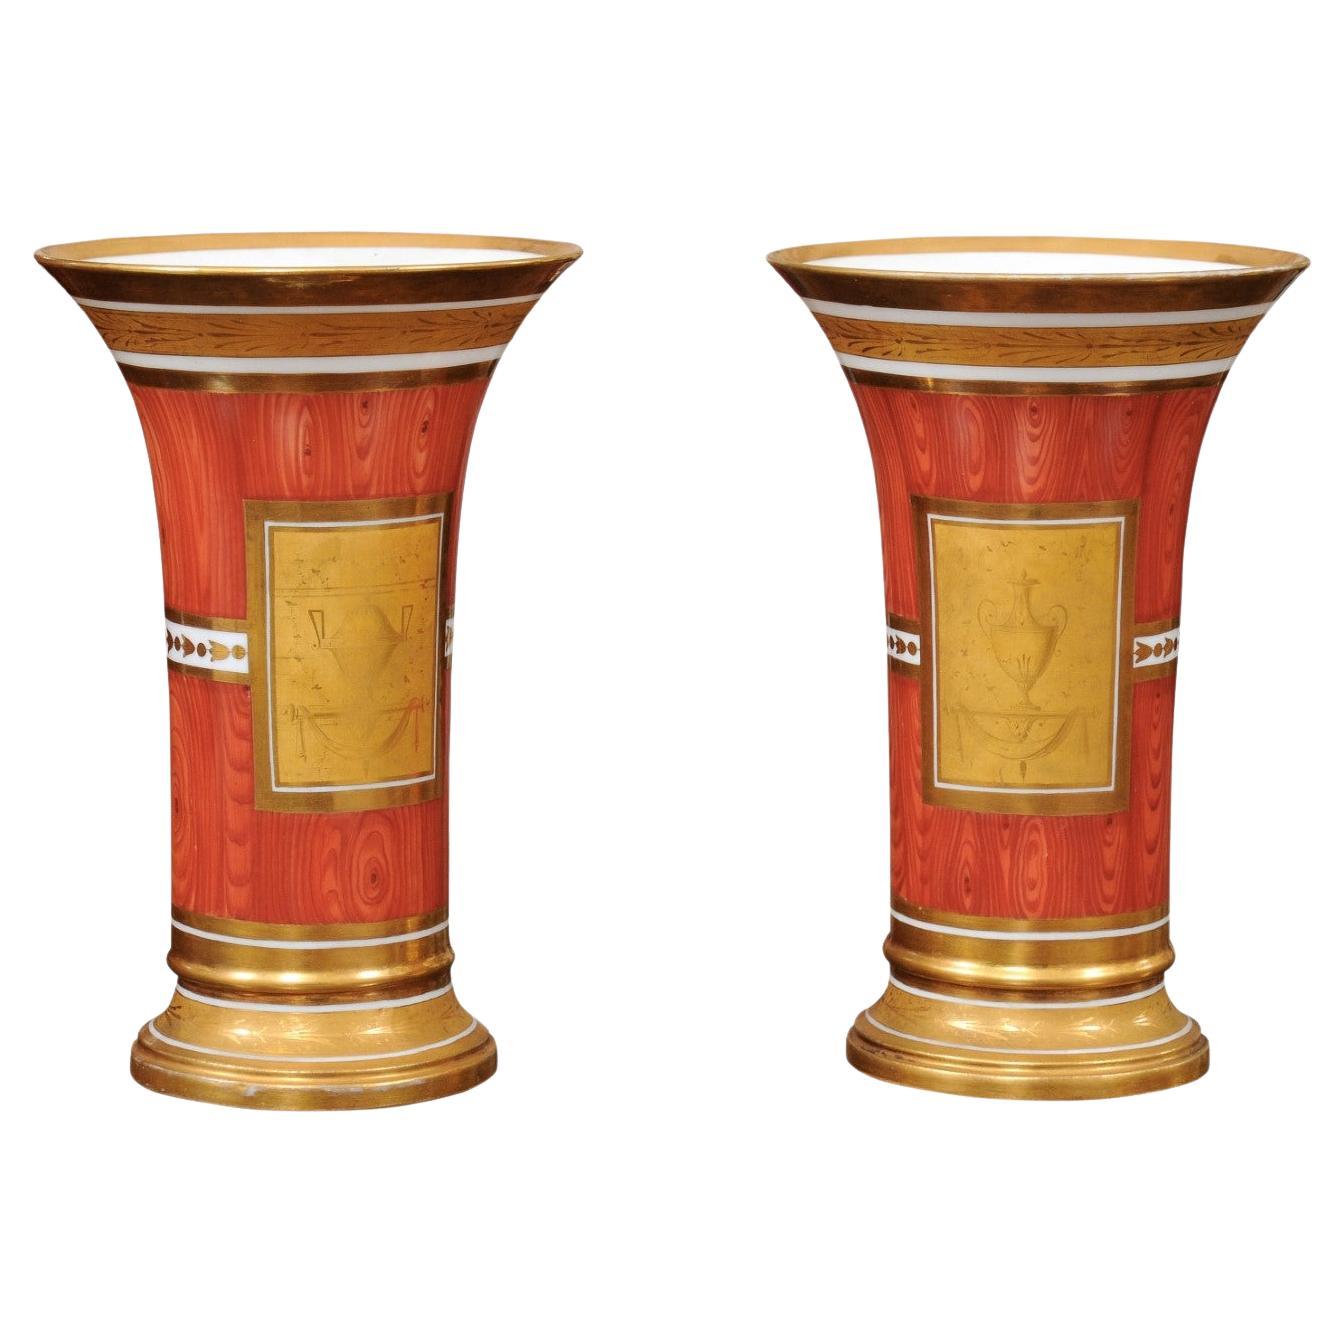 Pair of Continental Orange Faux Bois & Gilt Vases with Neoclassical Motif